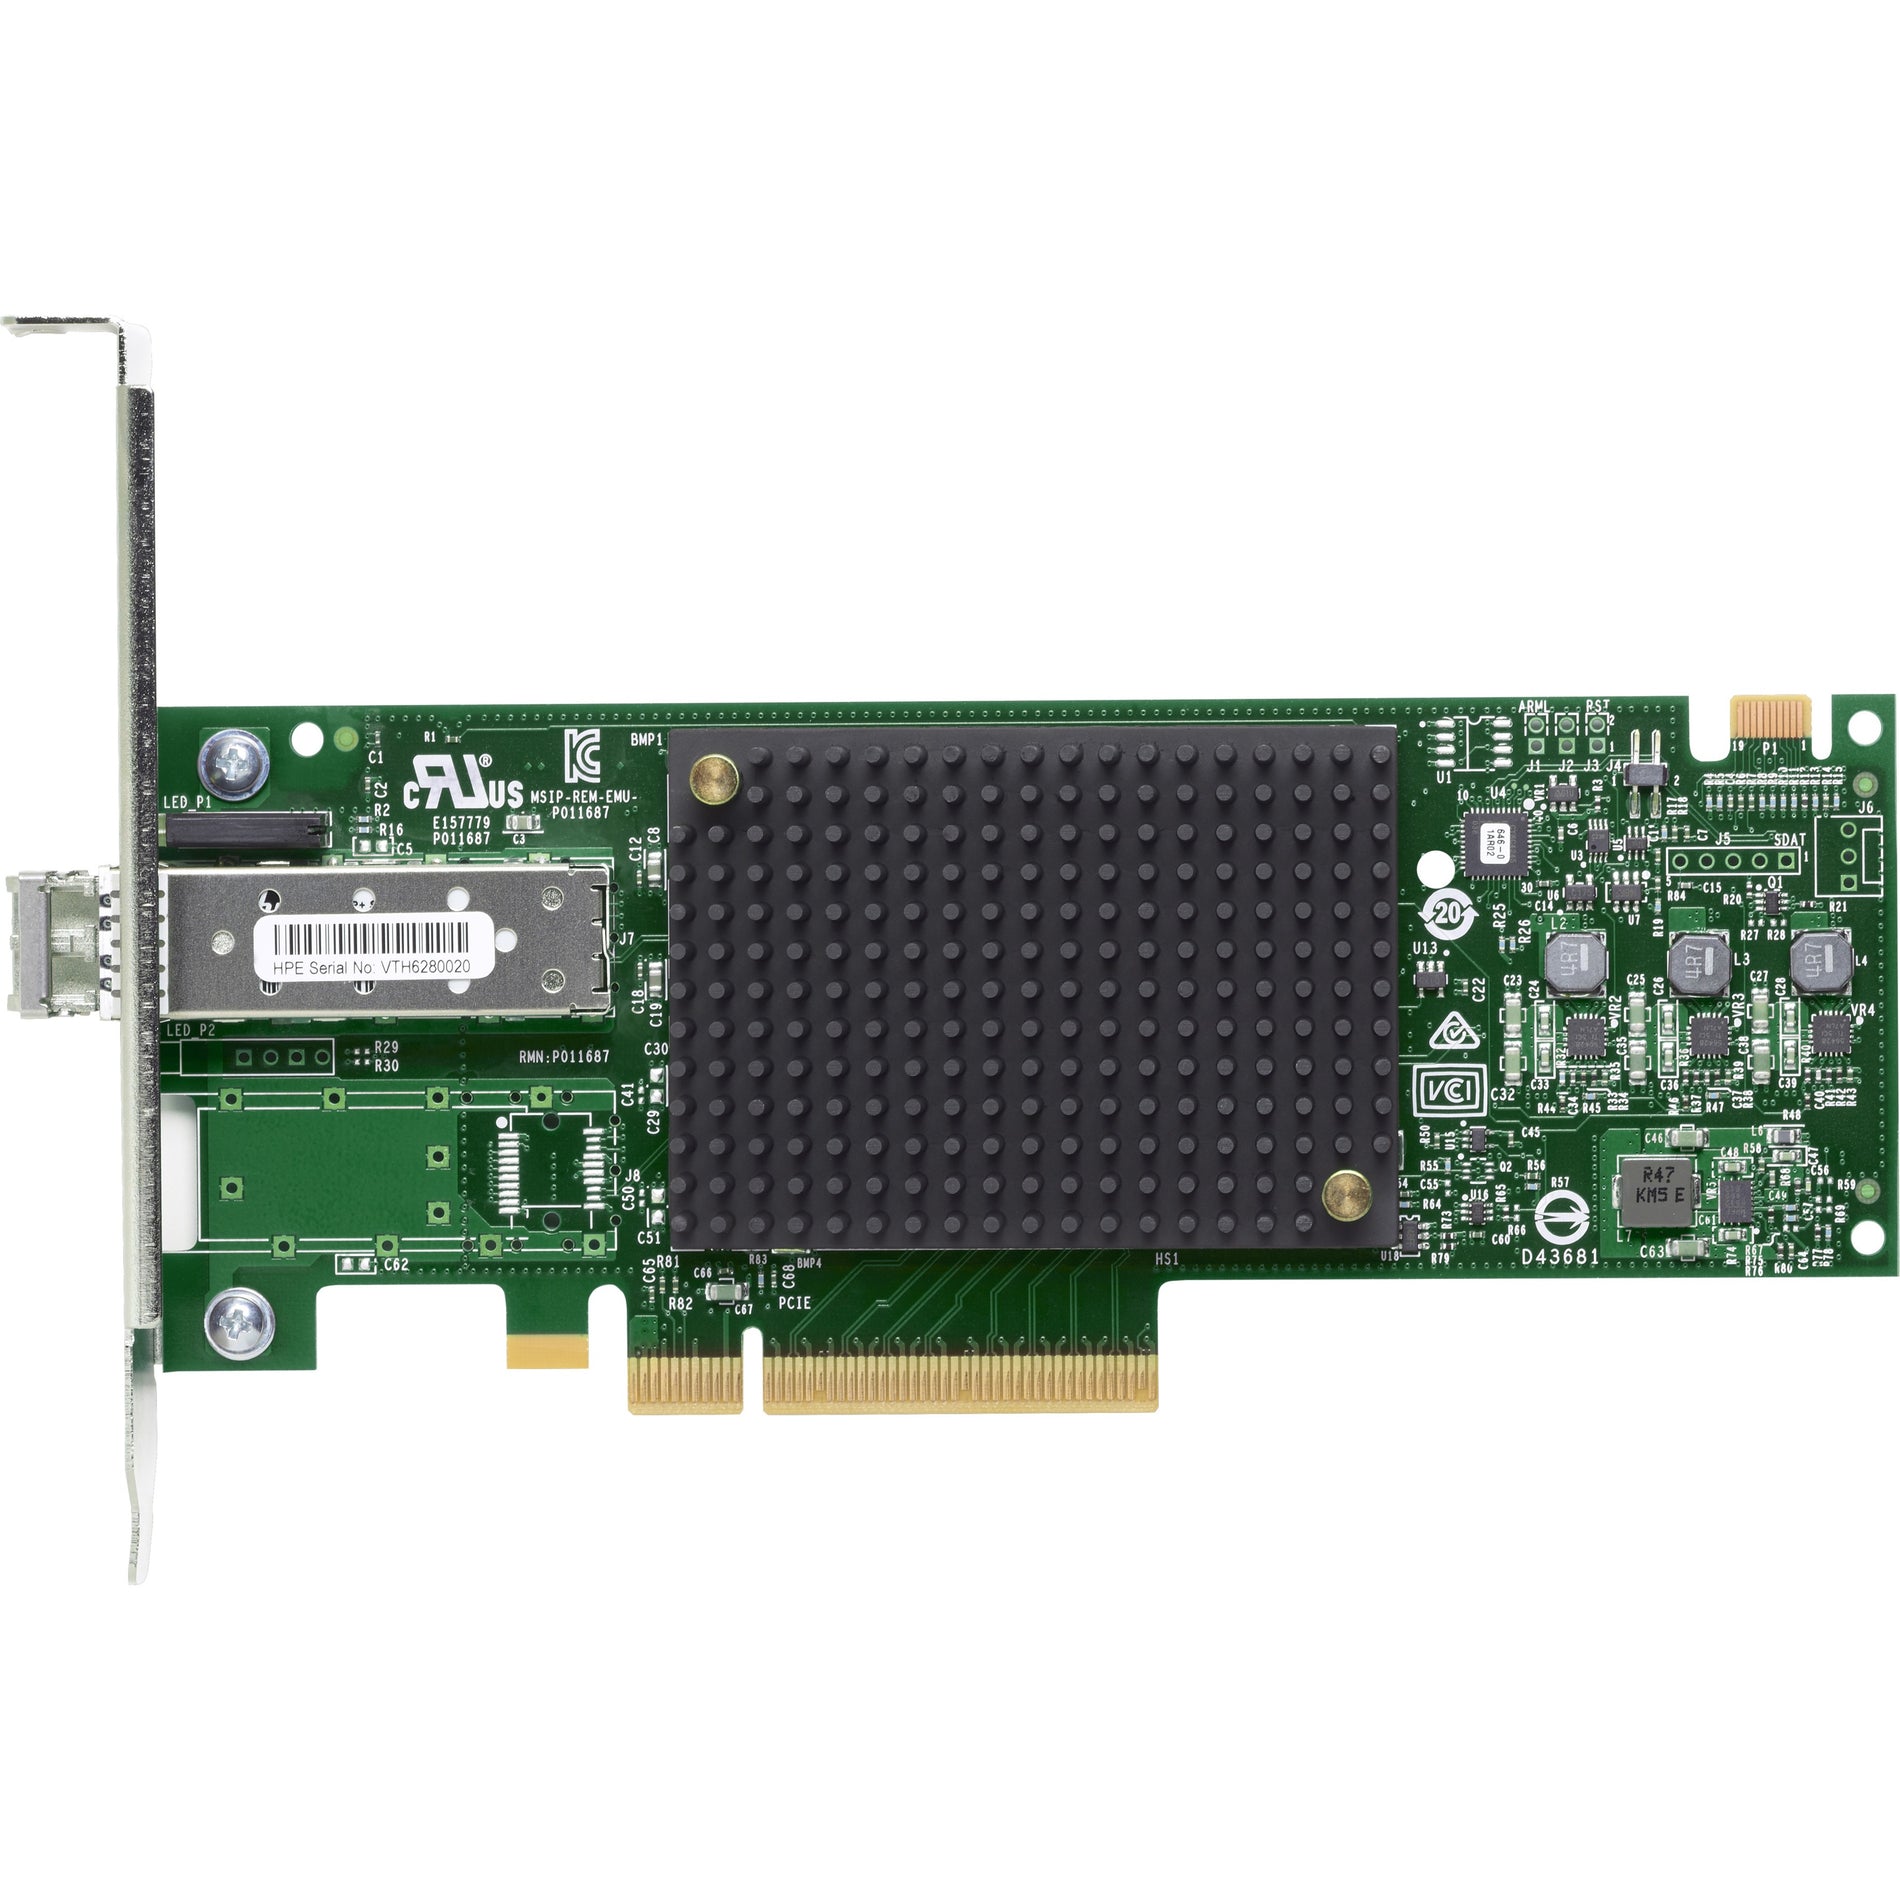 HPE Q0L13A StoreFabric SN1200E 16 Gb Single Port Fibre Channel Host Bus Adapter, High-Speed Data Transfer for Enhanced Connectivity